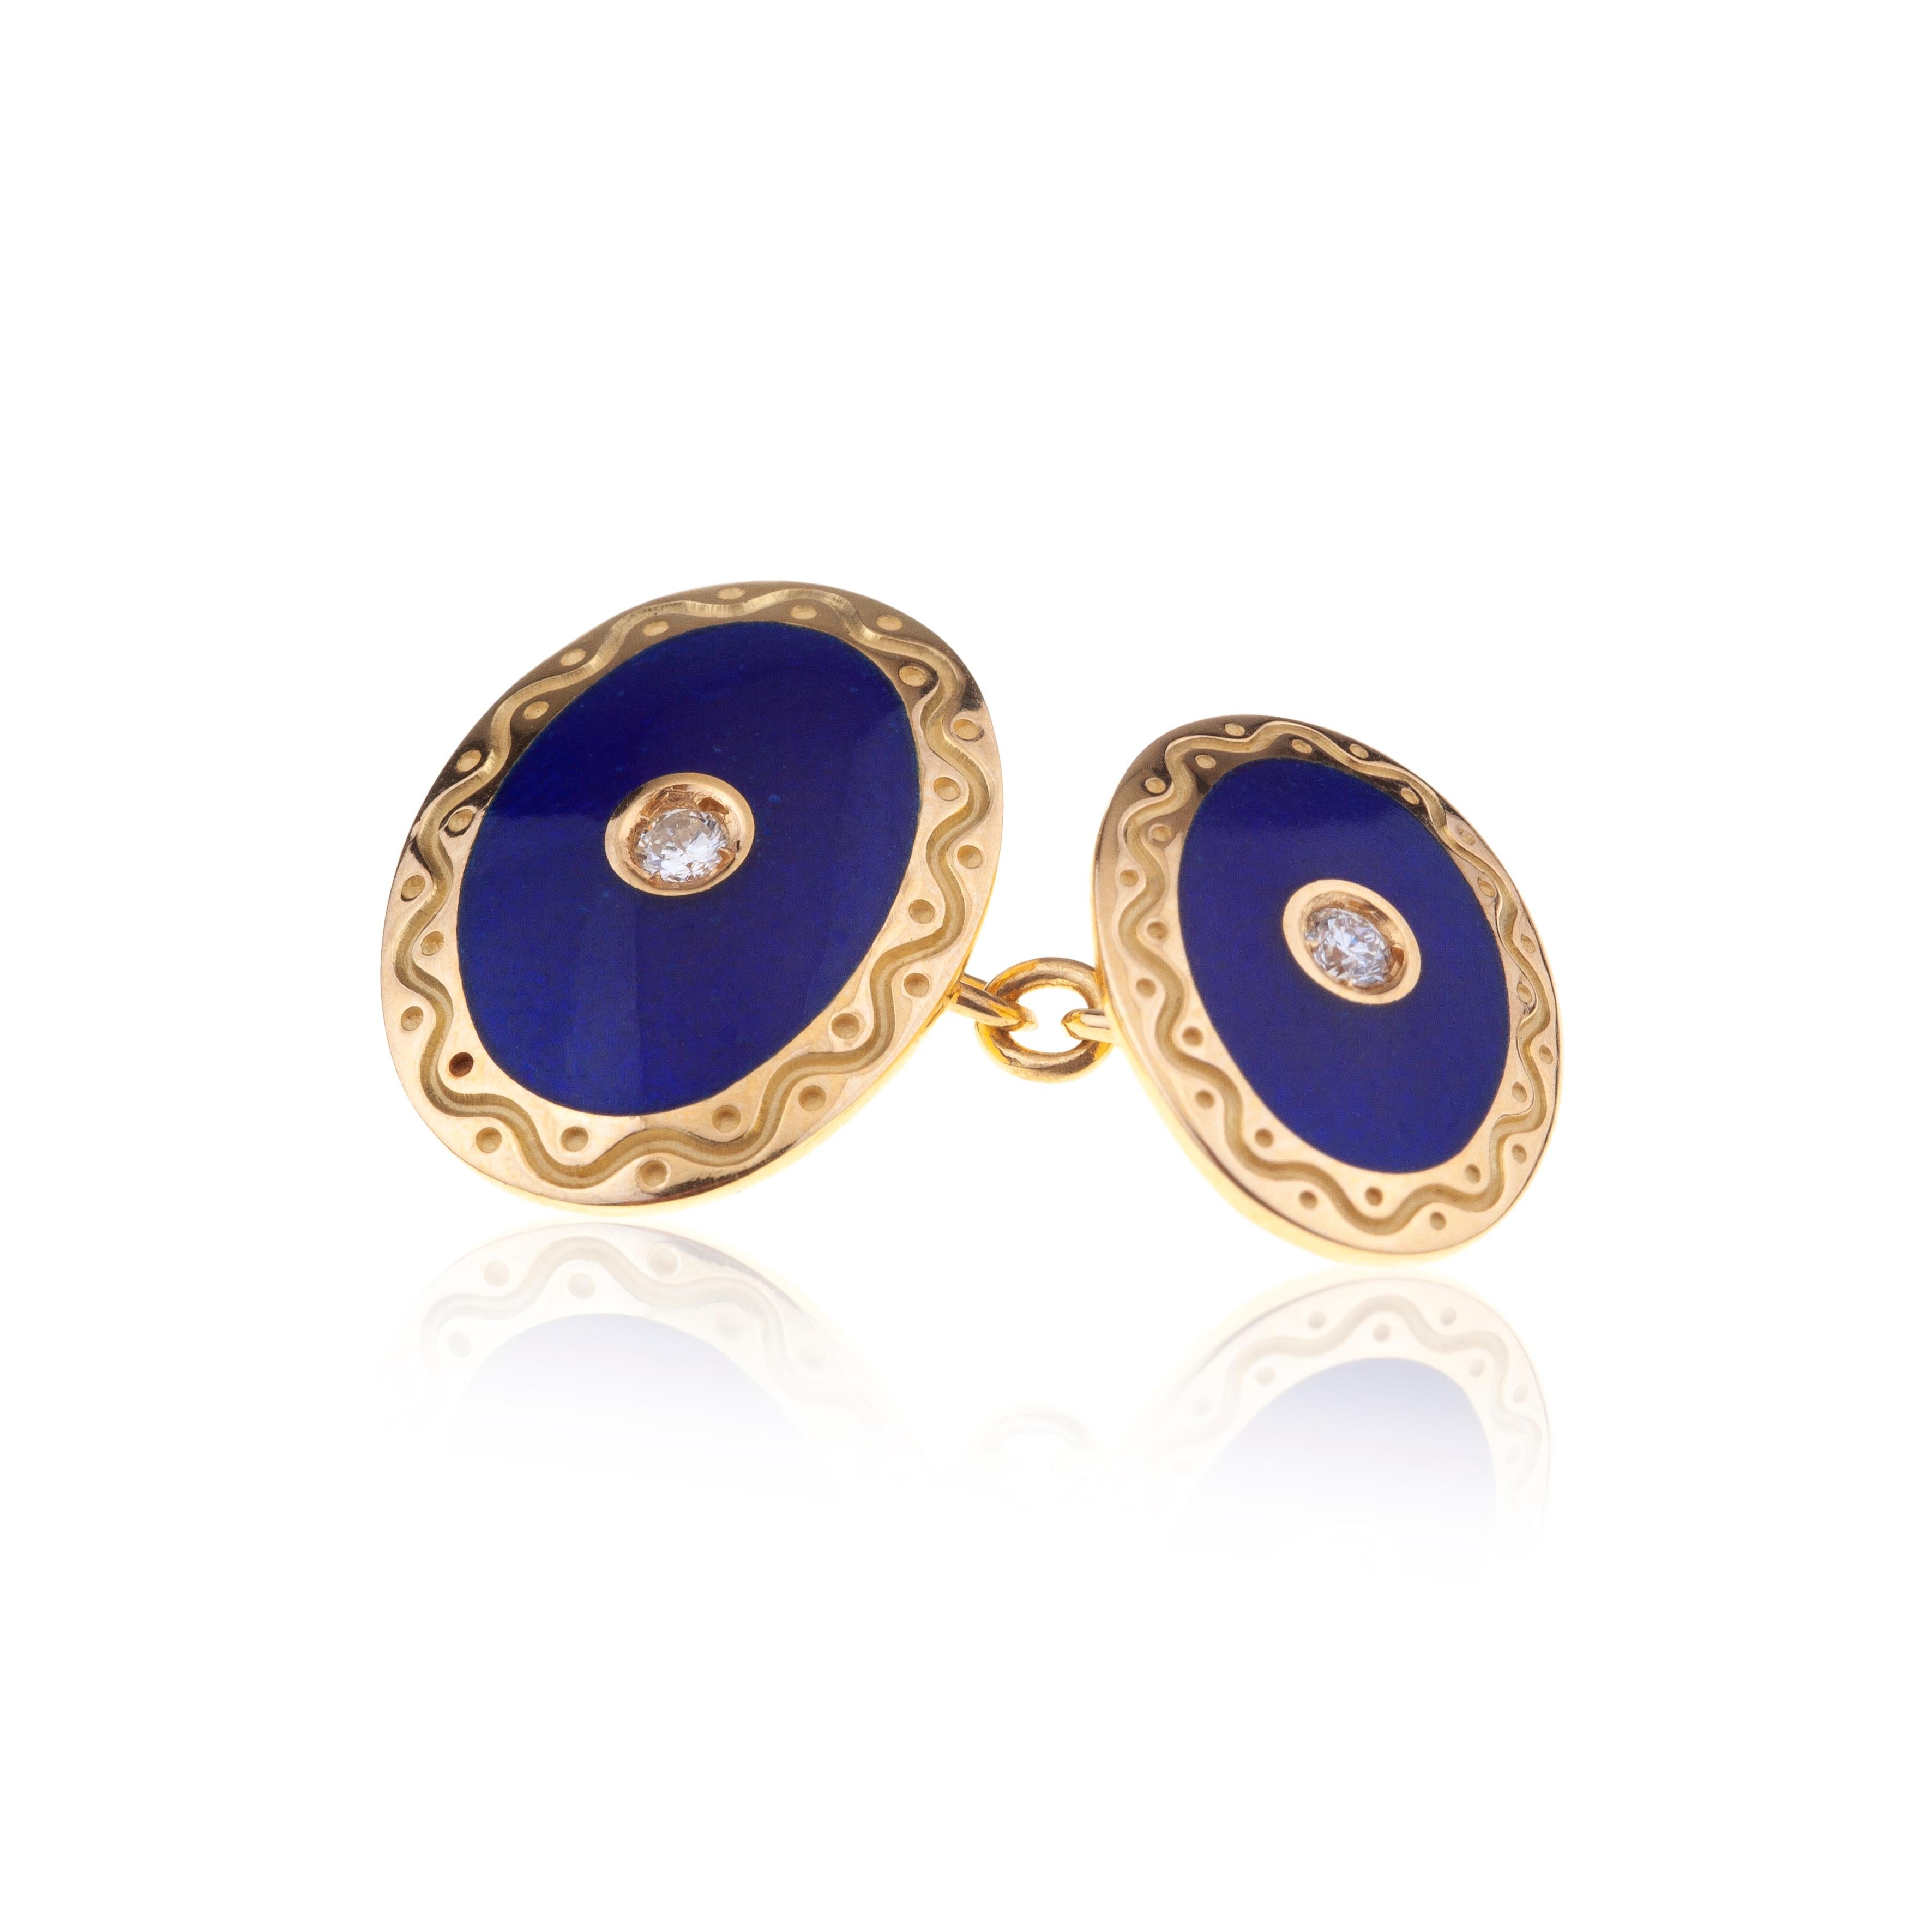 Cufflinks Oval 18kt Gold with Blue Enamel and Diamonds.
Cufflinks for Men for Business or Leisure Time to be worn on white, light blue or stripe Cuff Shirts.  
Four Diamonds are set on the 18kt Gold Blue Enamel oval on both sides.  
The weight of